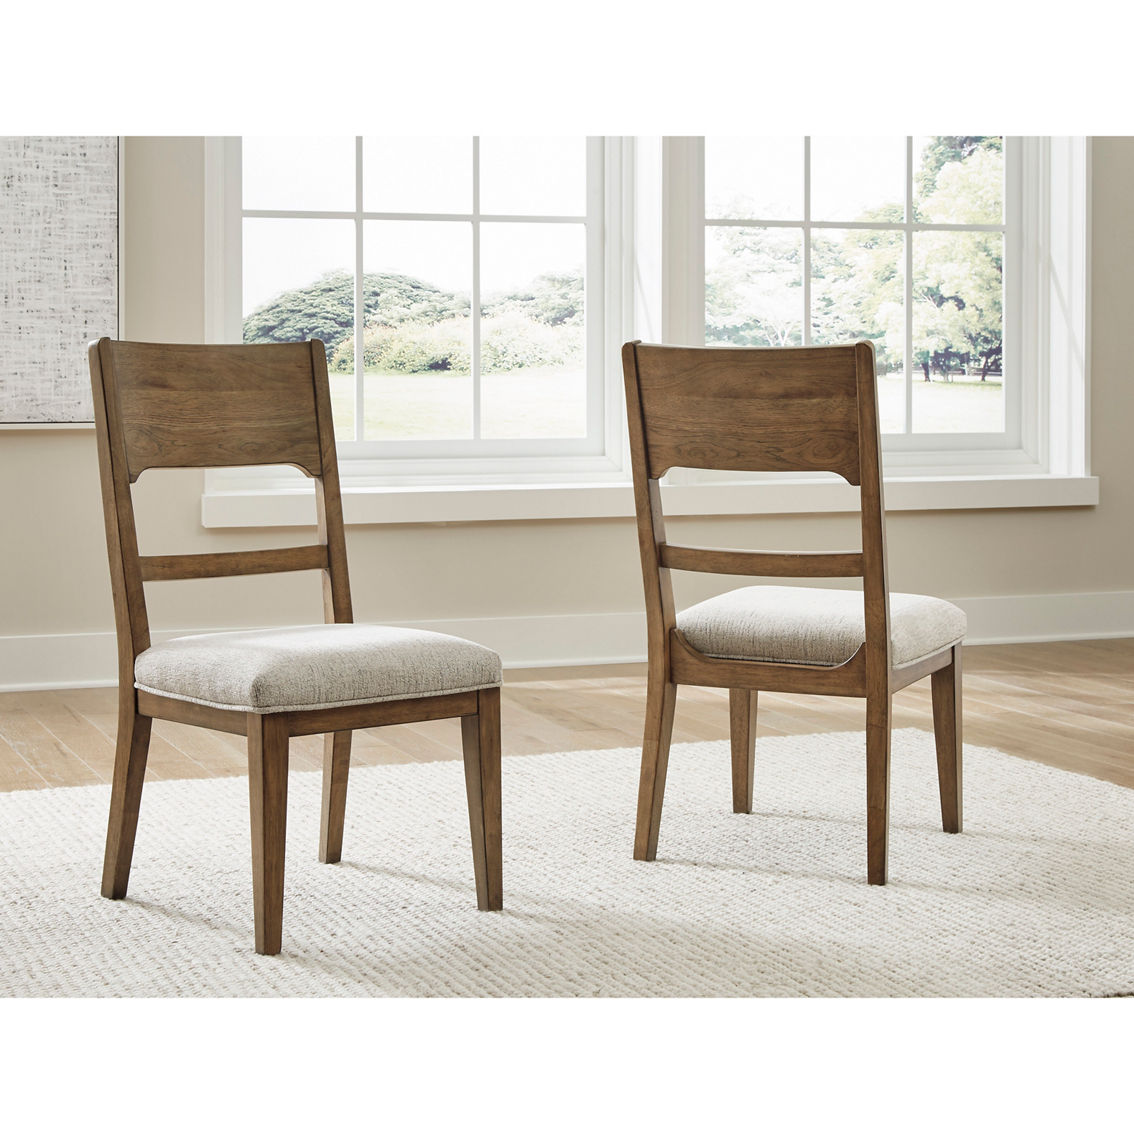 Millennium by Ashley Cabalyn Dining Set 8 pc. - Image 5 of 8